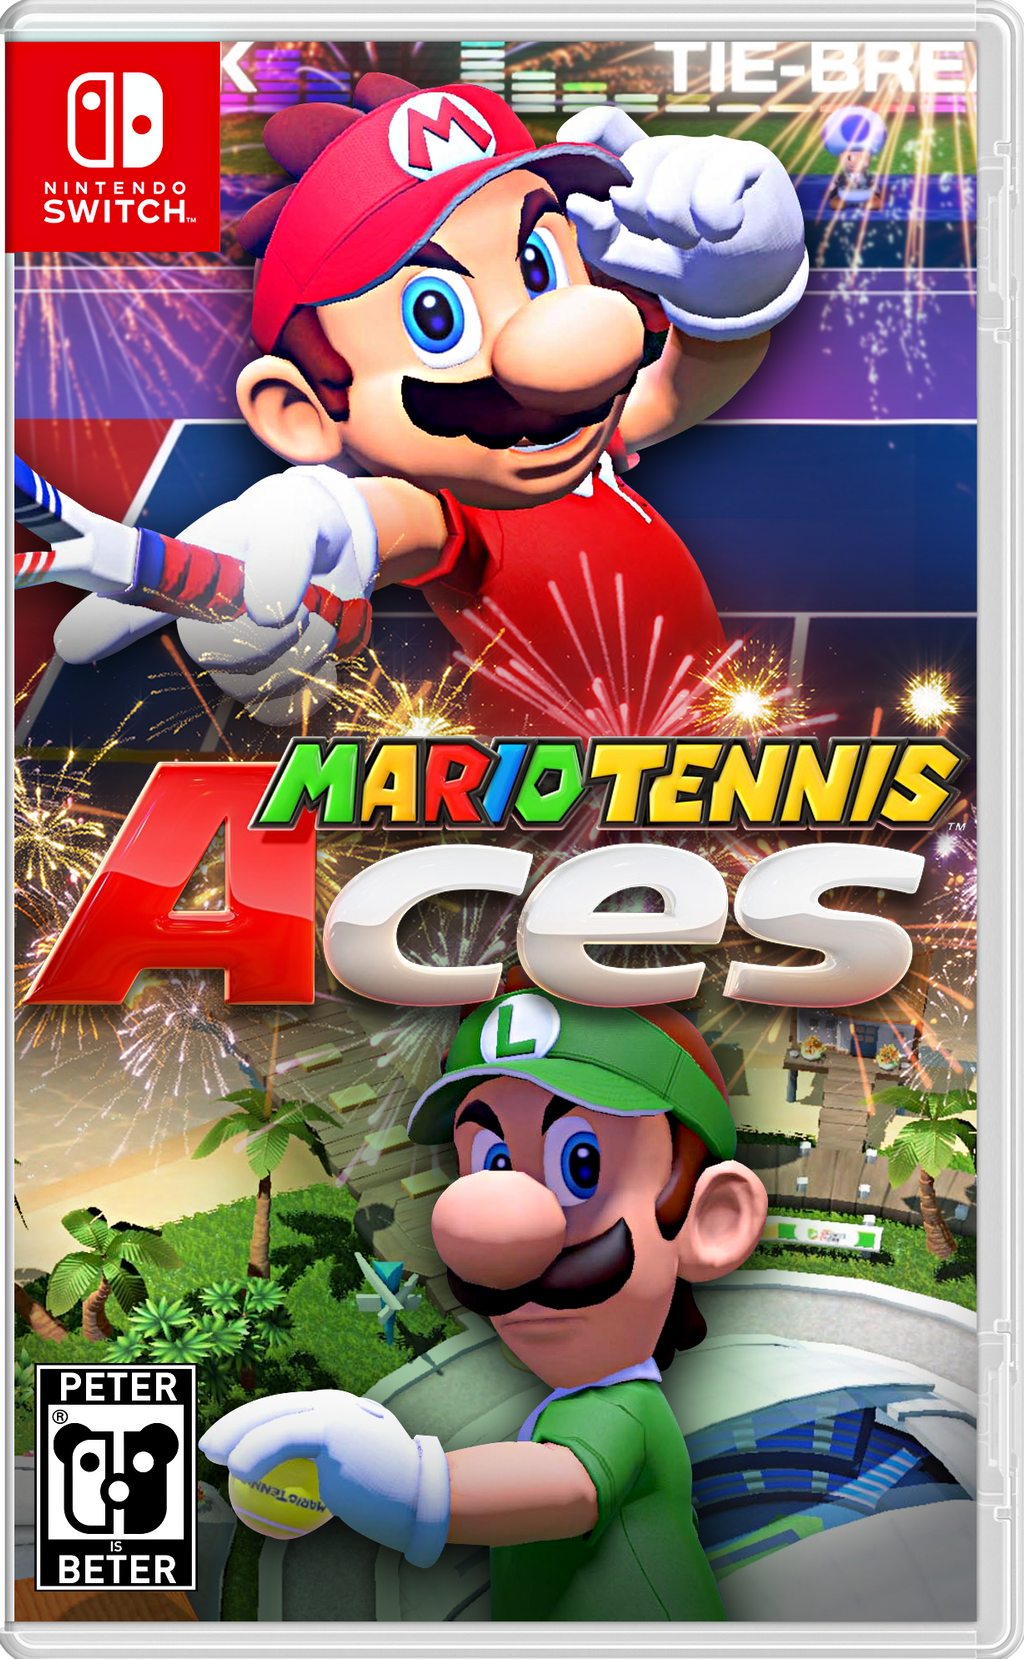 Mario Tennis Aces Nintendo Switch Cover by PeterisBeter on DeviantArt